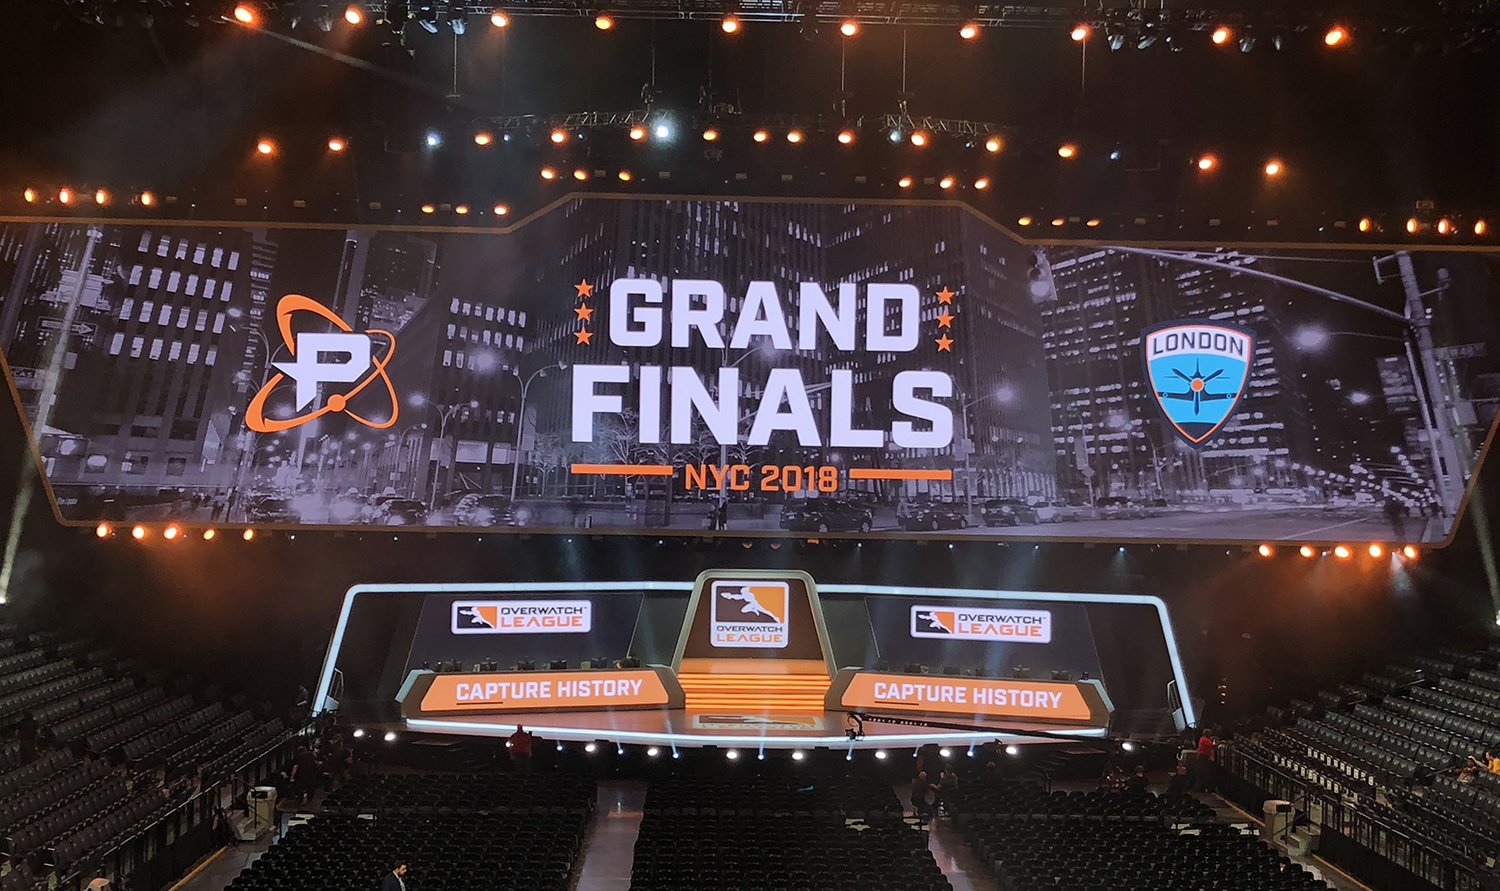 Live From Overwatch League Grand Finals: Blizzard Entertainment Rolls Out Its Largest Production Ever